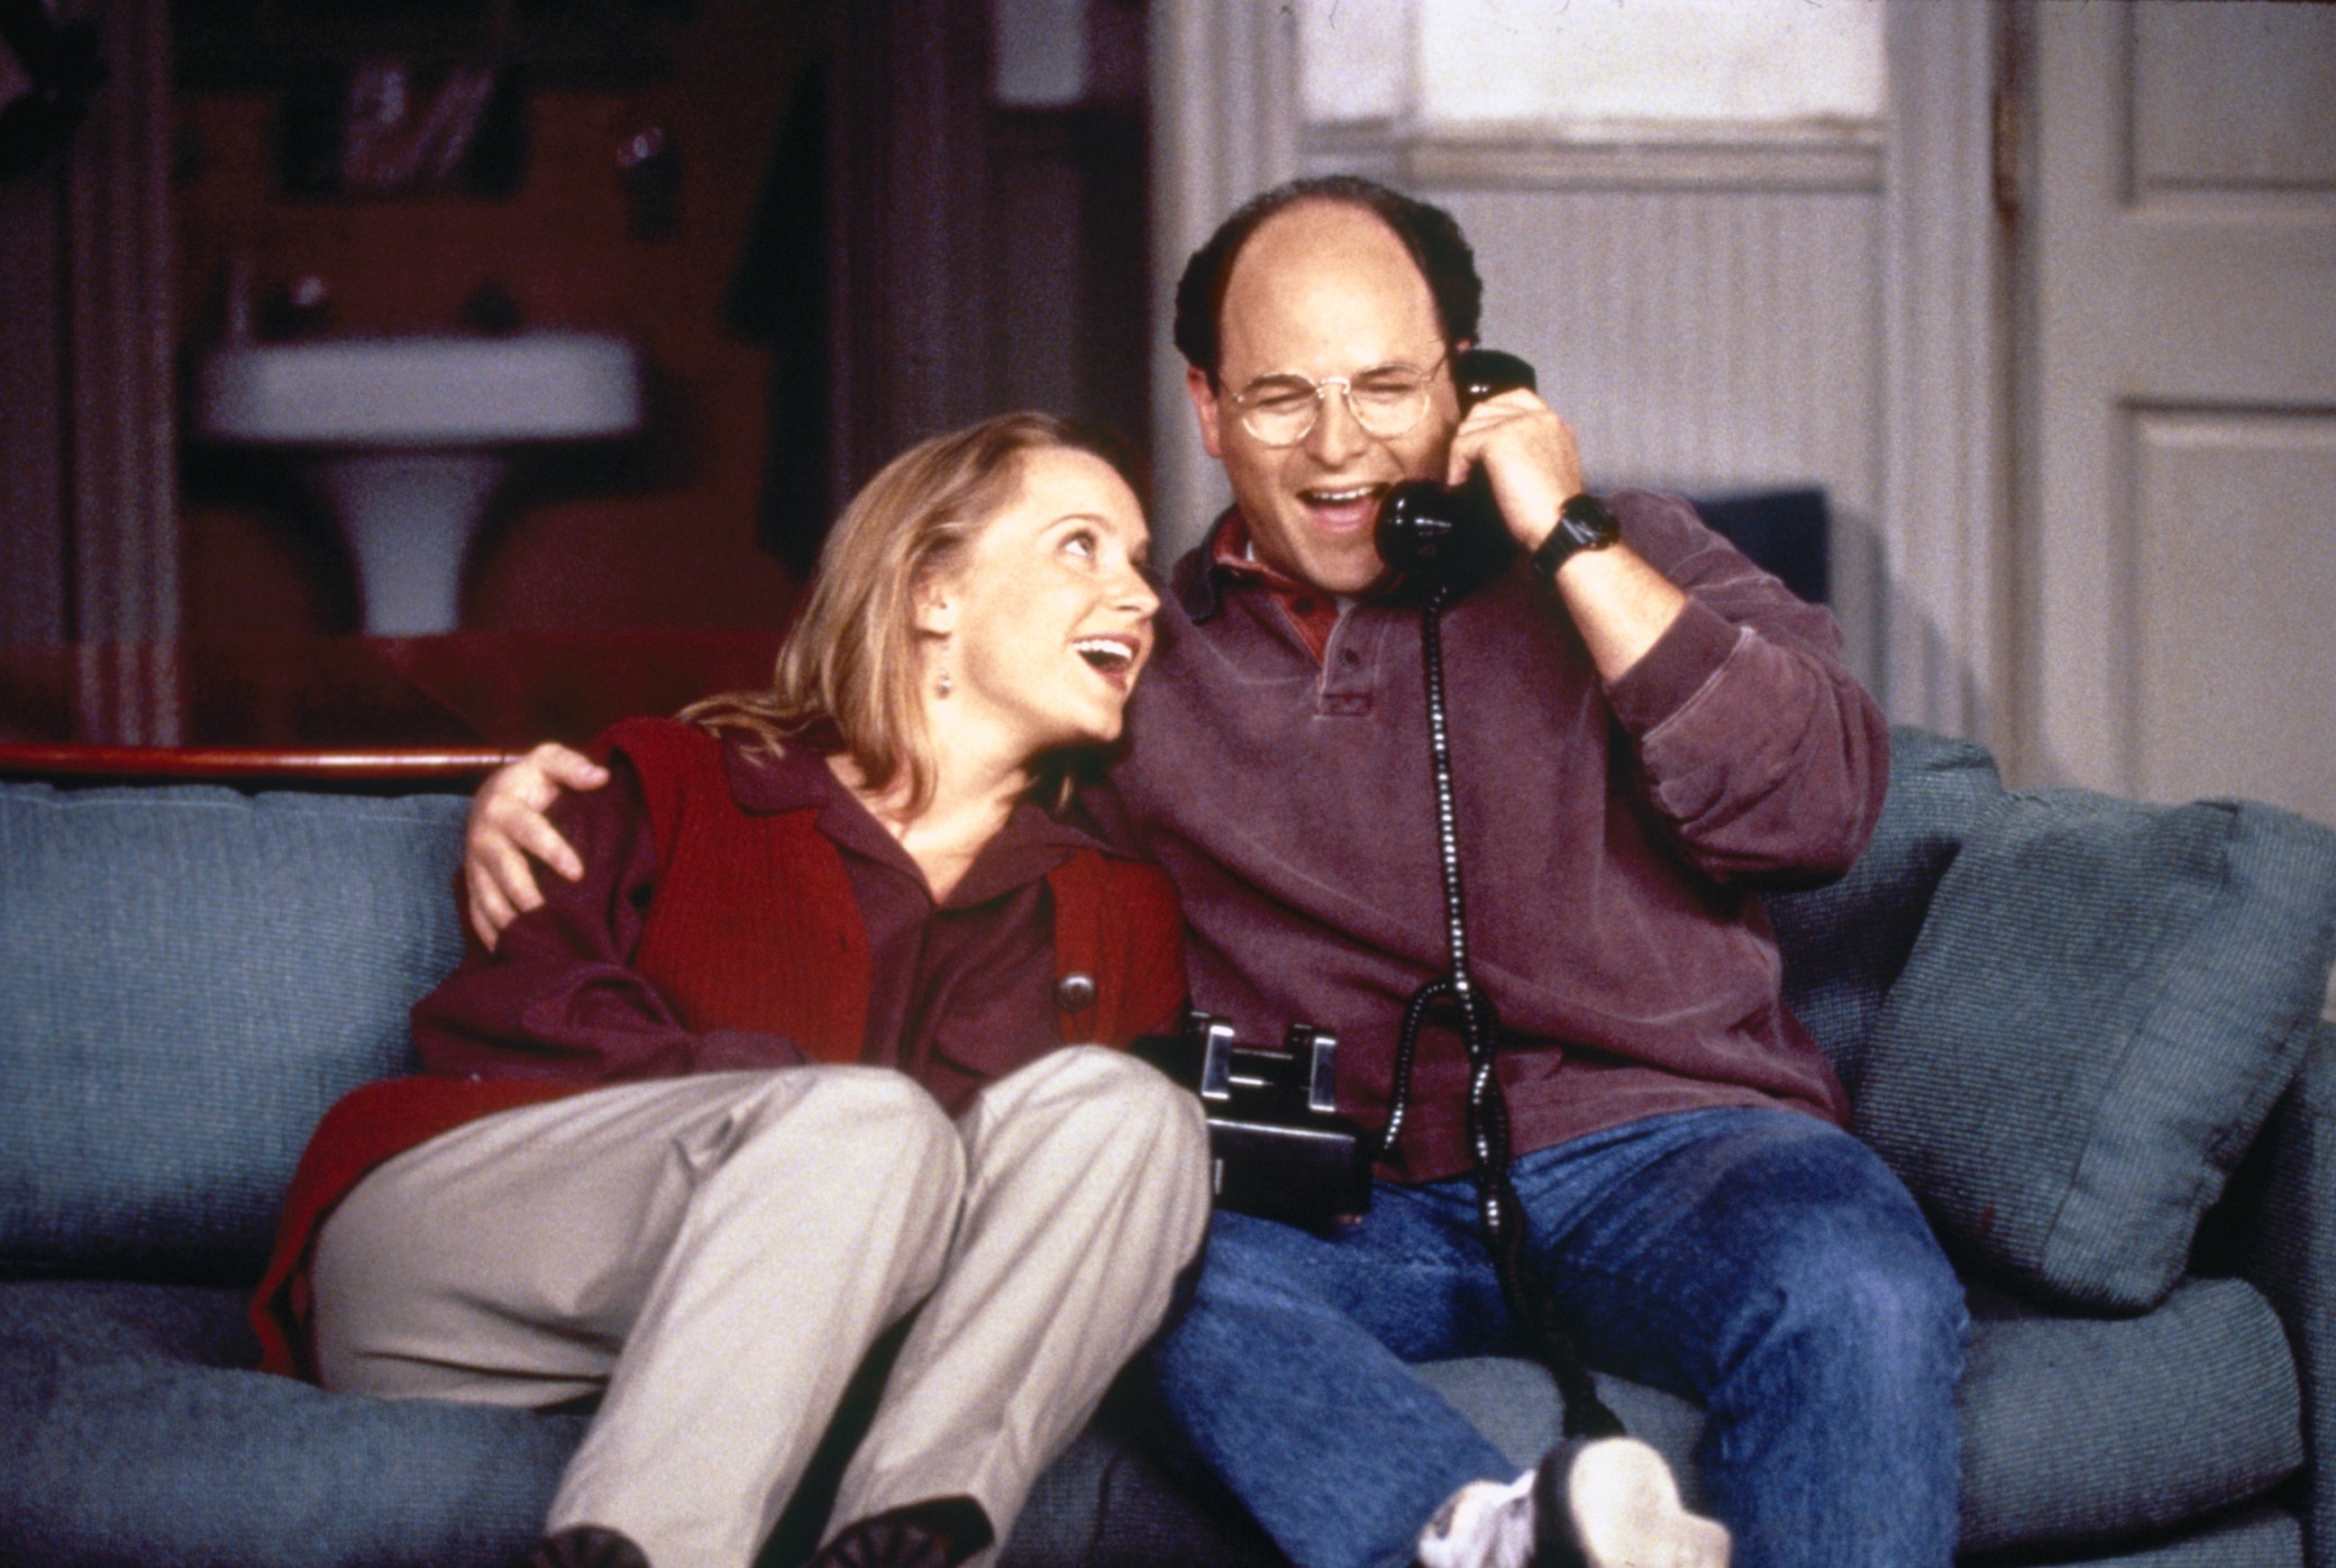 PHOTO: Susan Ross (Heidi Swedberg) and George Costanza (Jason Alexander) become engaged in the Season 7 premiere episode of "Seinfeld," titled "The Engagement." The episode first aired Sept. 21, 1995.